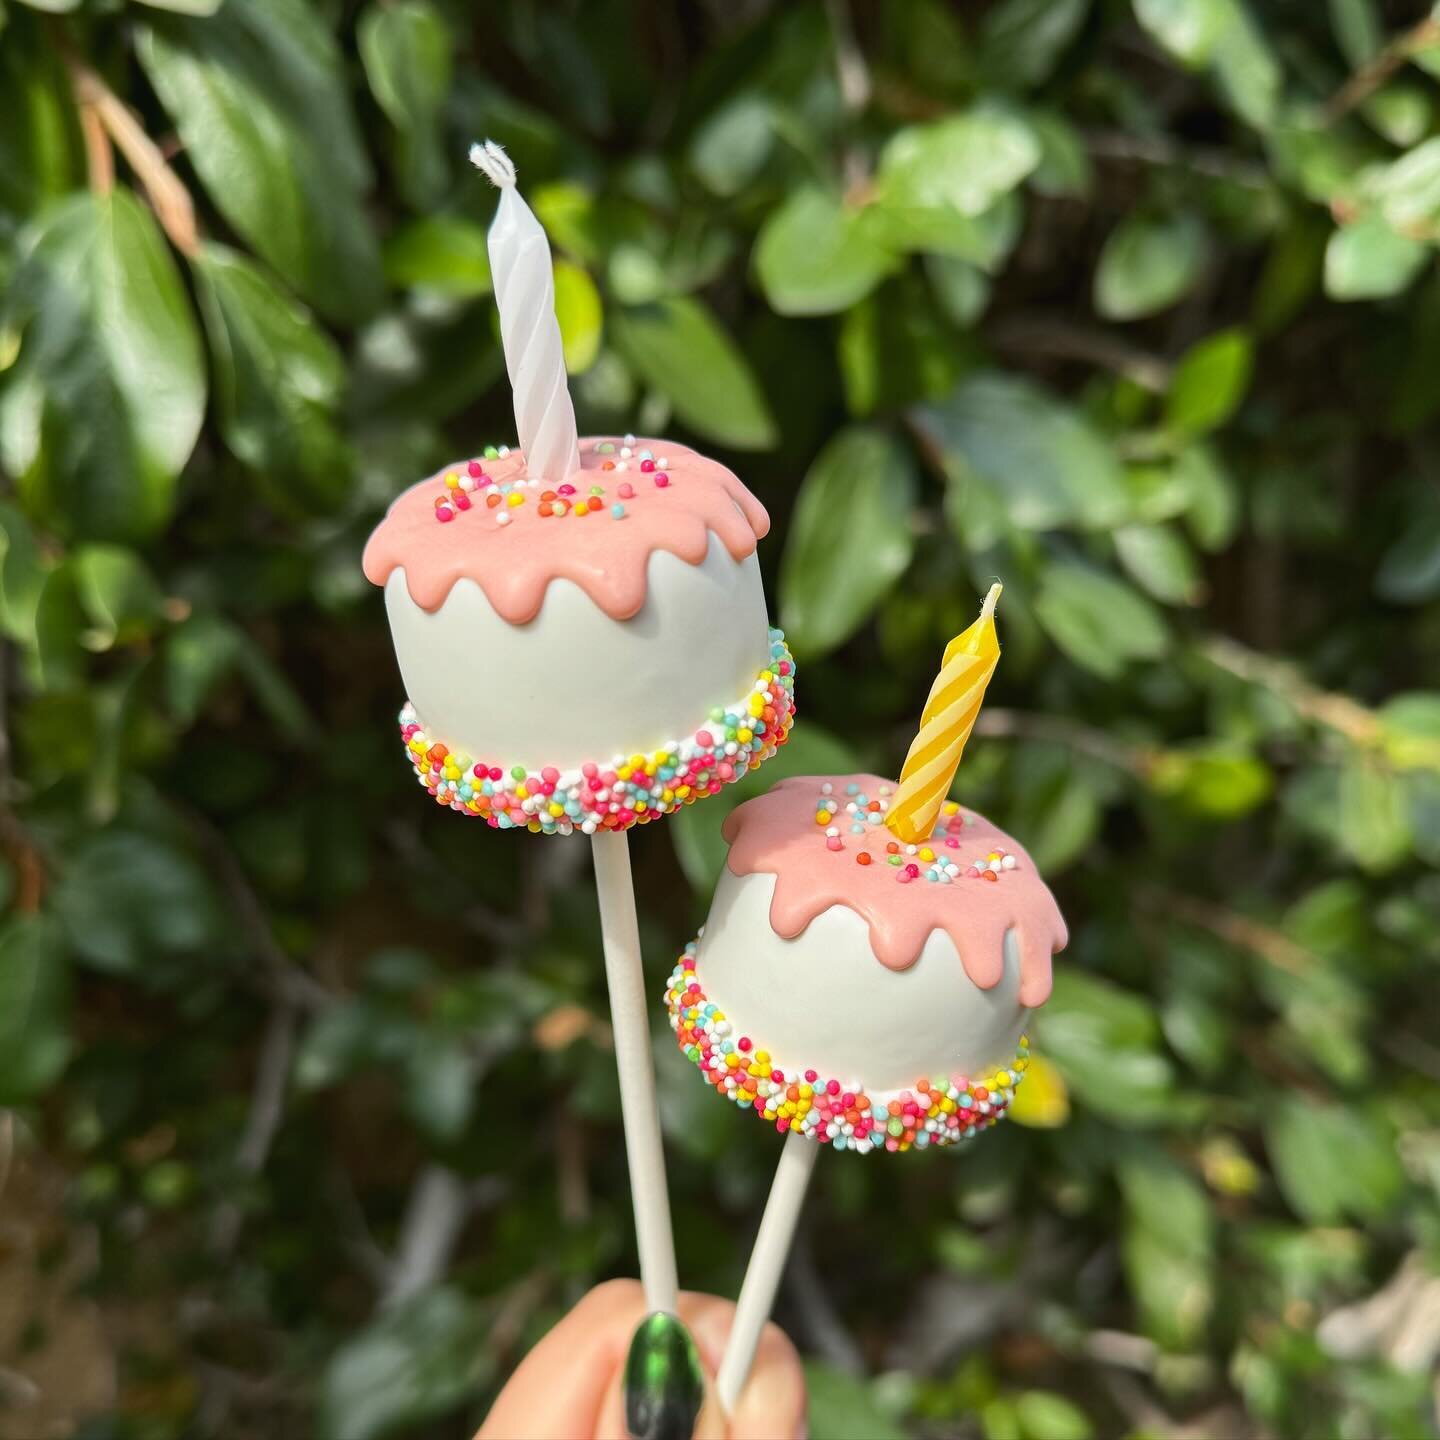 Blow out the candle and make a wish! 🎂🎉
&bull;
&bull;
&bull;
#cakepops #baking #dessert #sweets #foodie #foodporn #foodphotography #instadessert #foodofinstagram #bakersofinstagram #dessertgram #cakepopsofinstagram #cakepopstagram #cakepopart #food